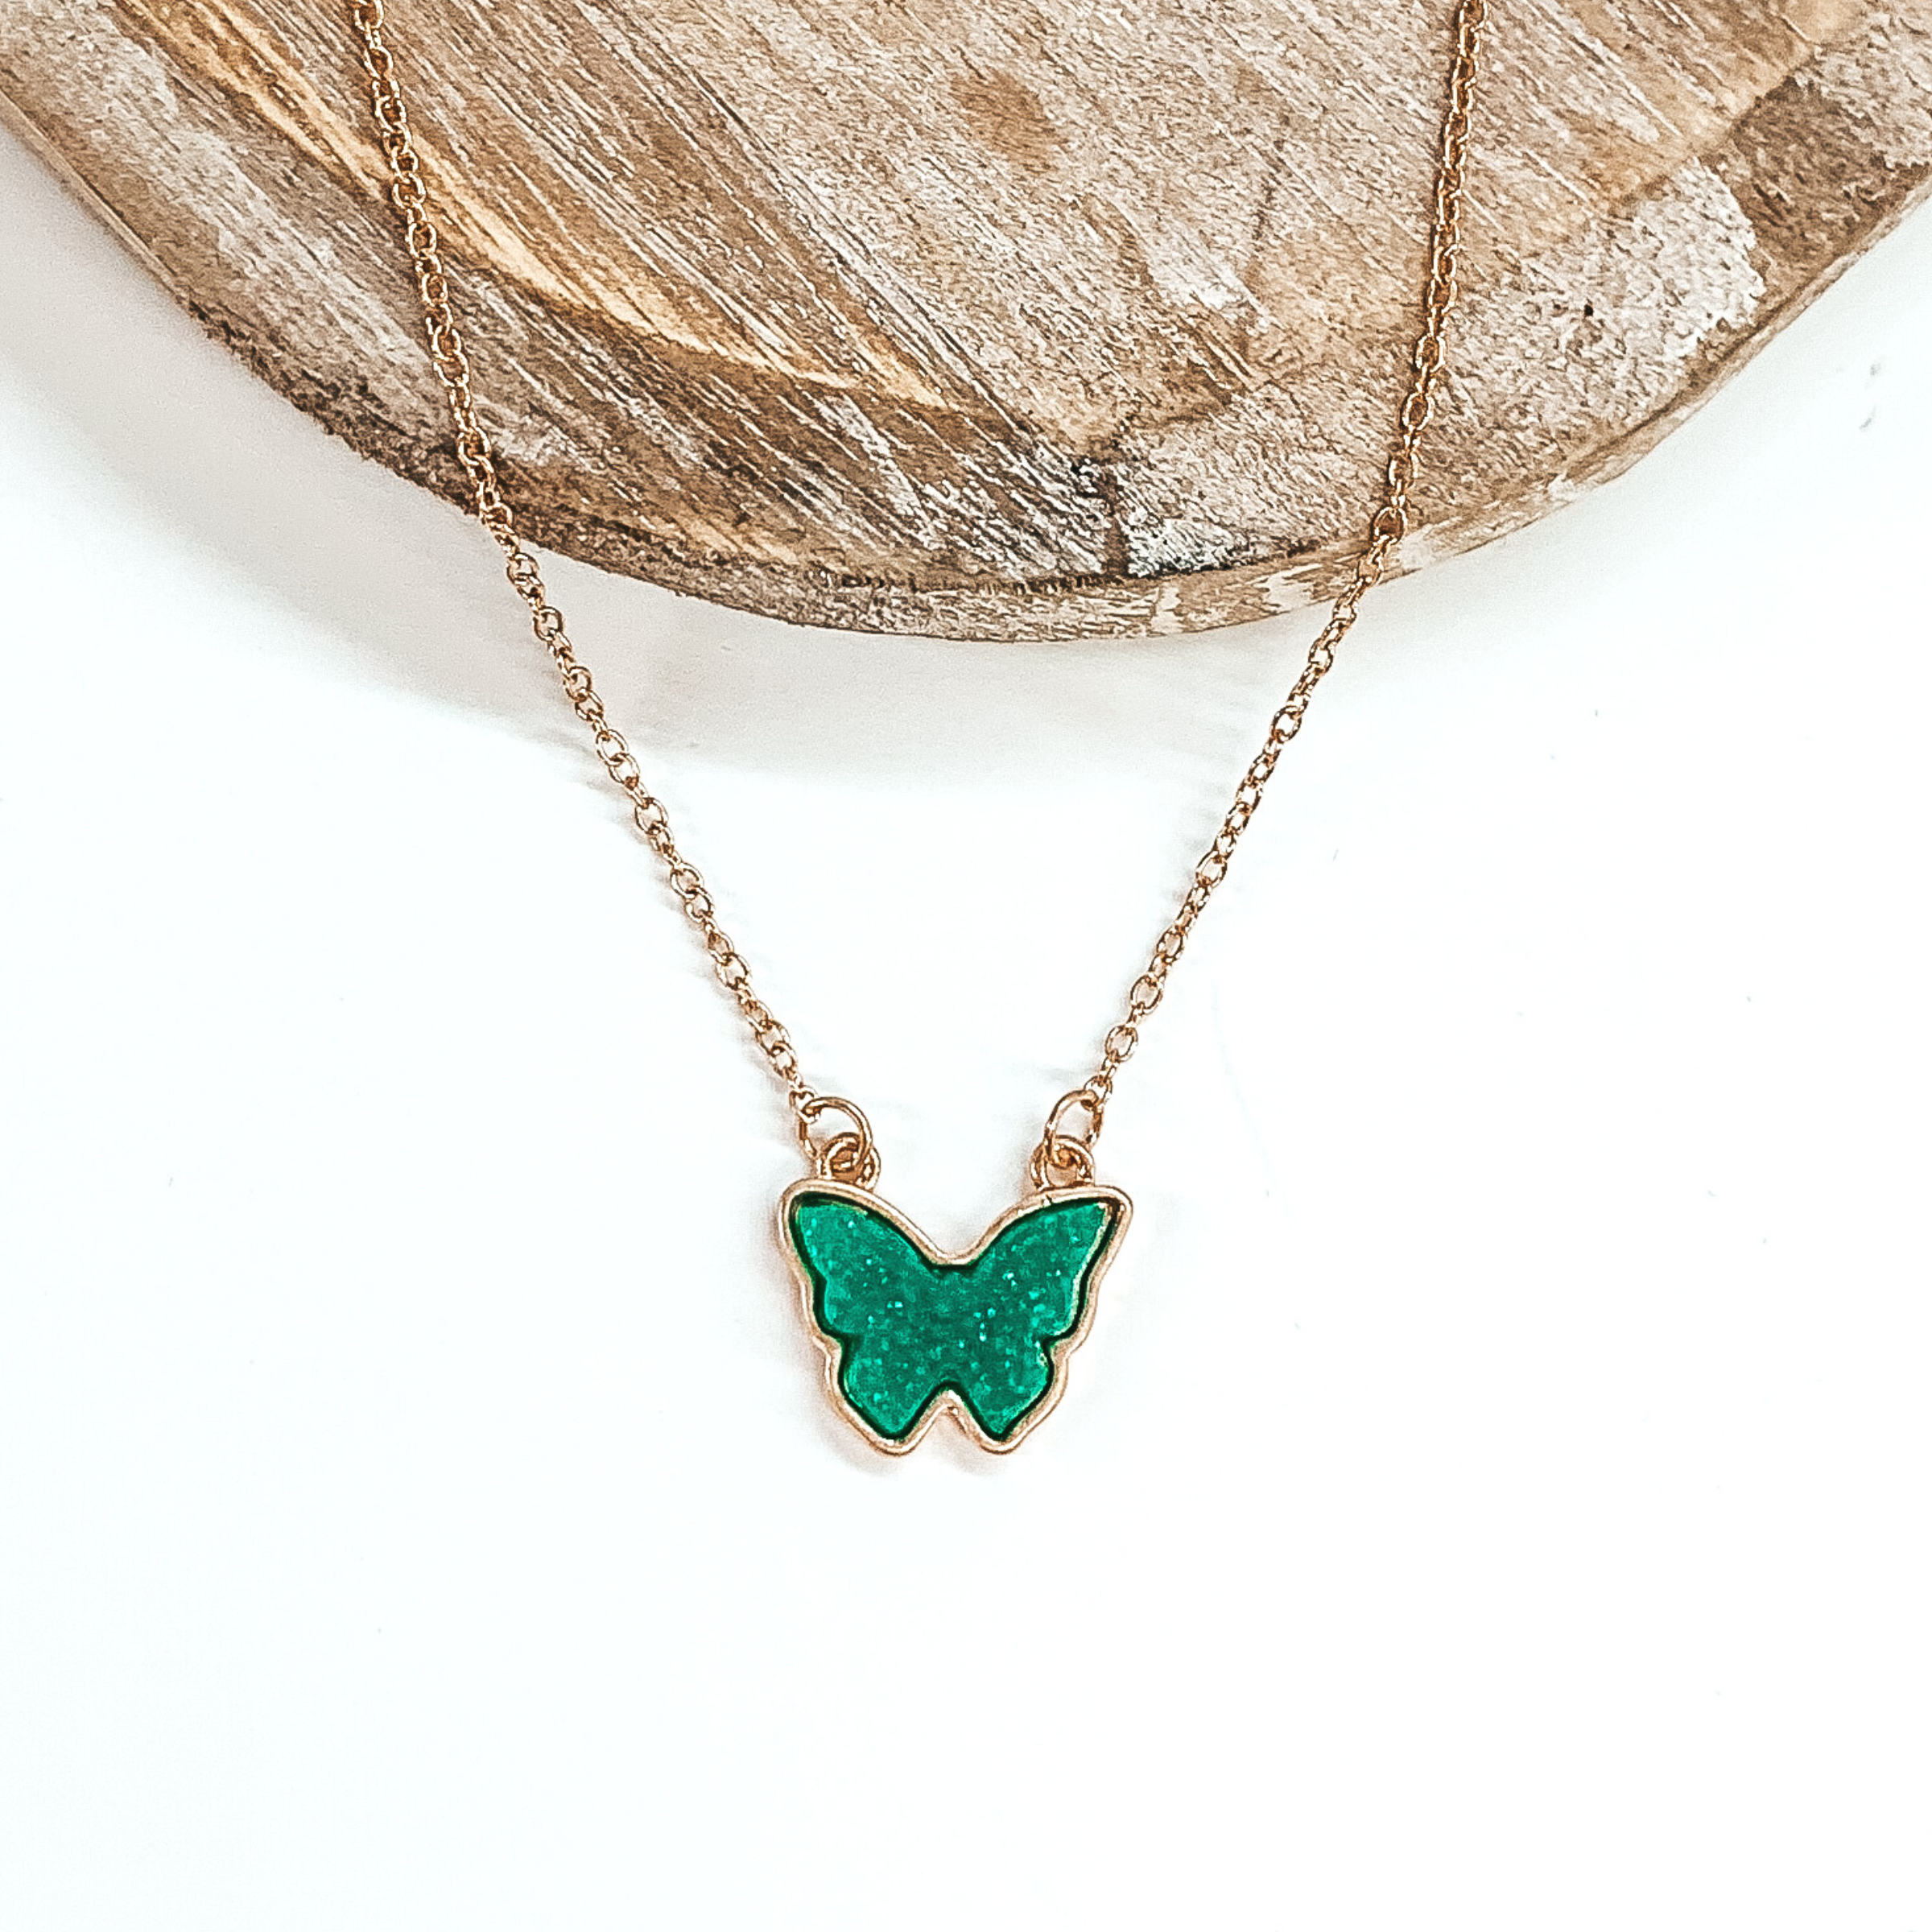 Tiny gold chained necklace includes a turquoise, druzy butterfly pendant that is outlined in gold. This necklace is pictured on a white background with a tan piece of wood at the top of the picture.